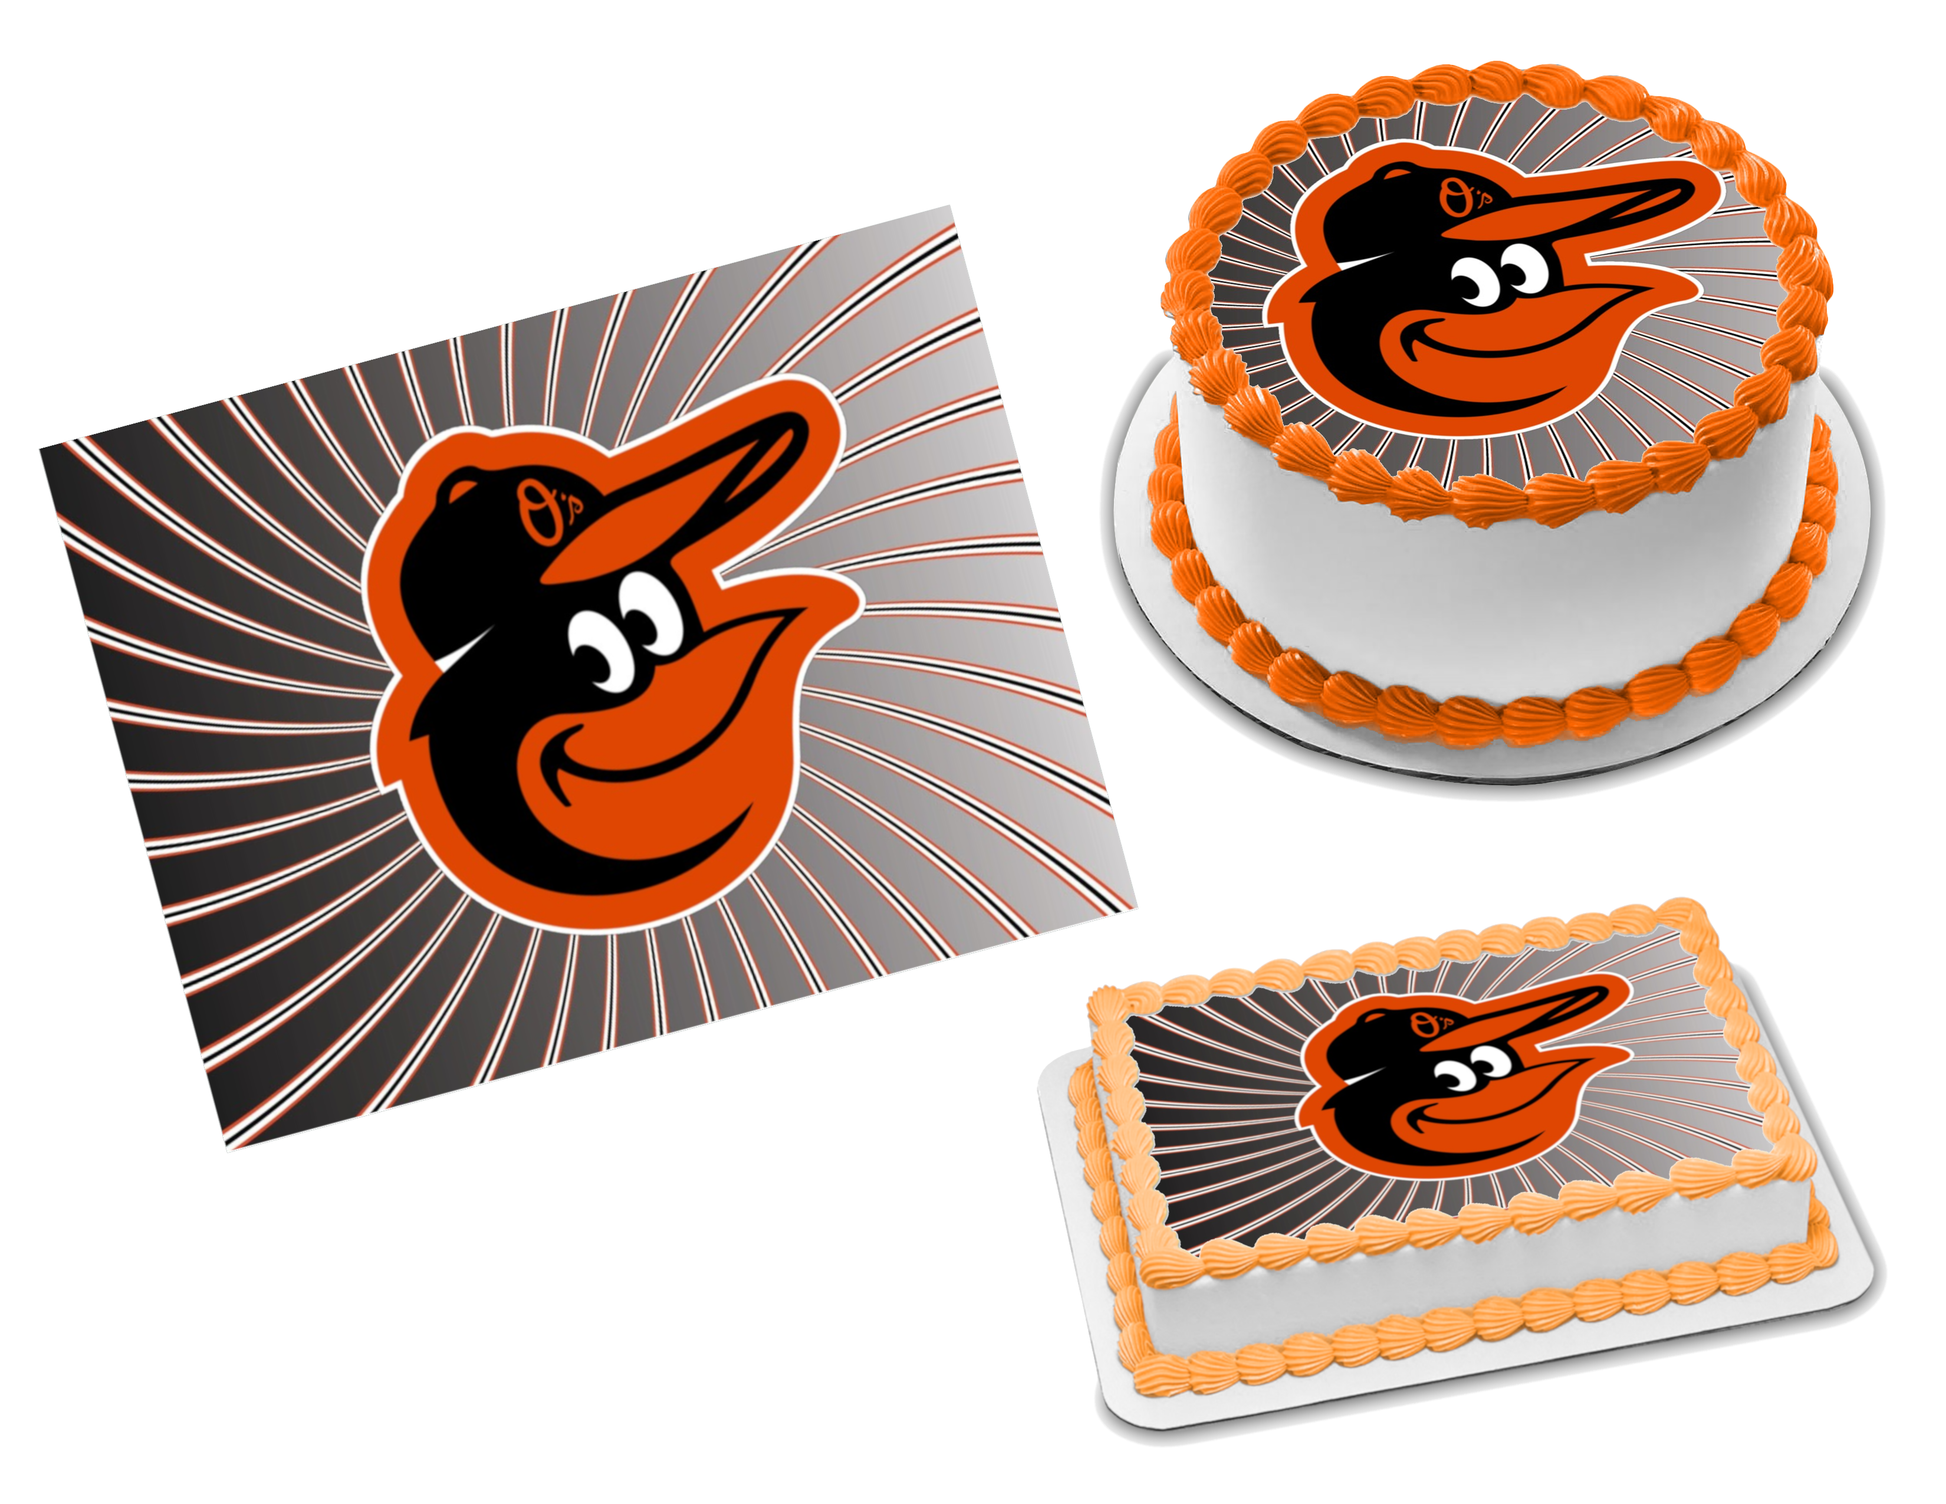 Baltimore Orioles on X: Showered and ready for the day!